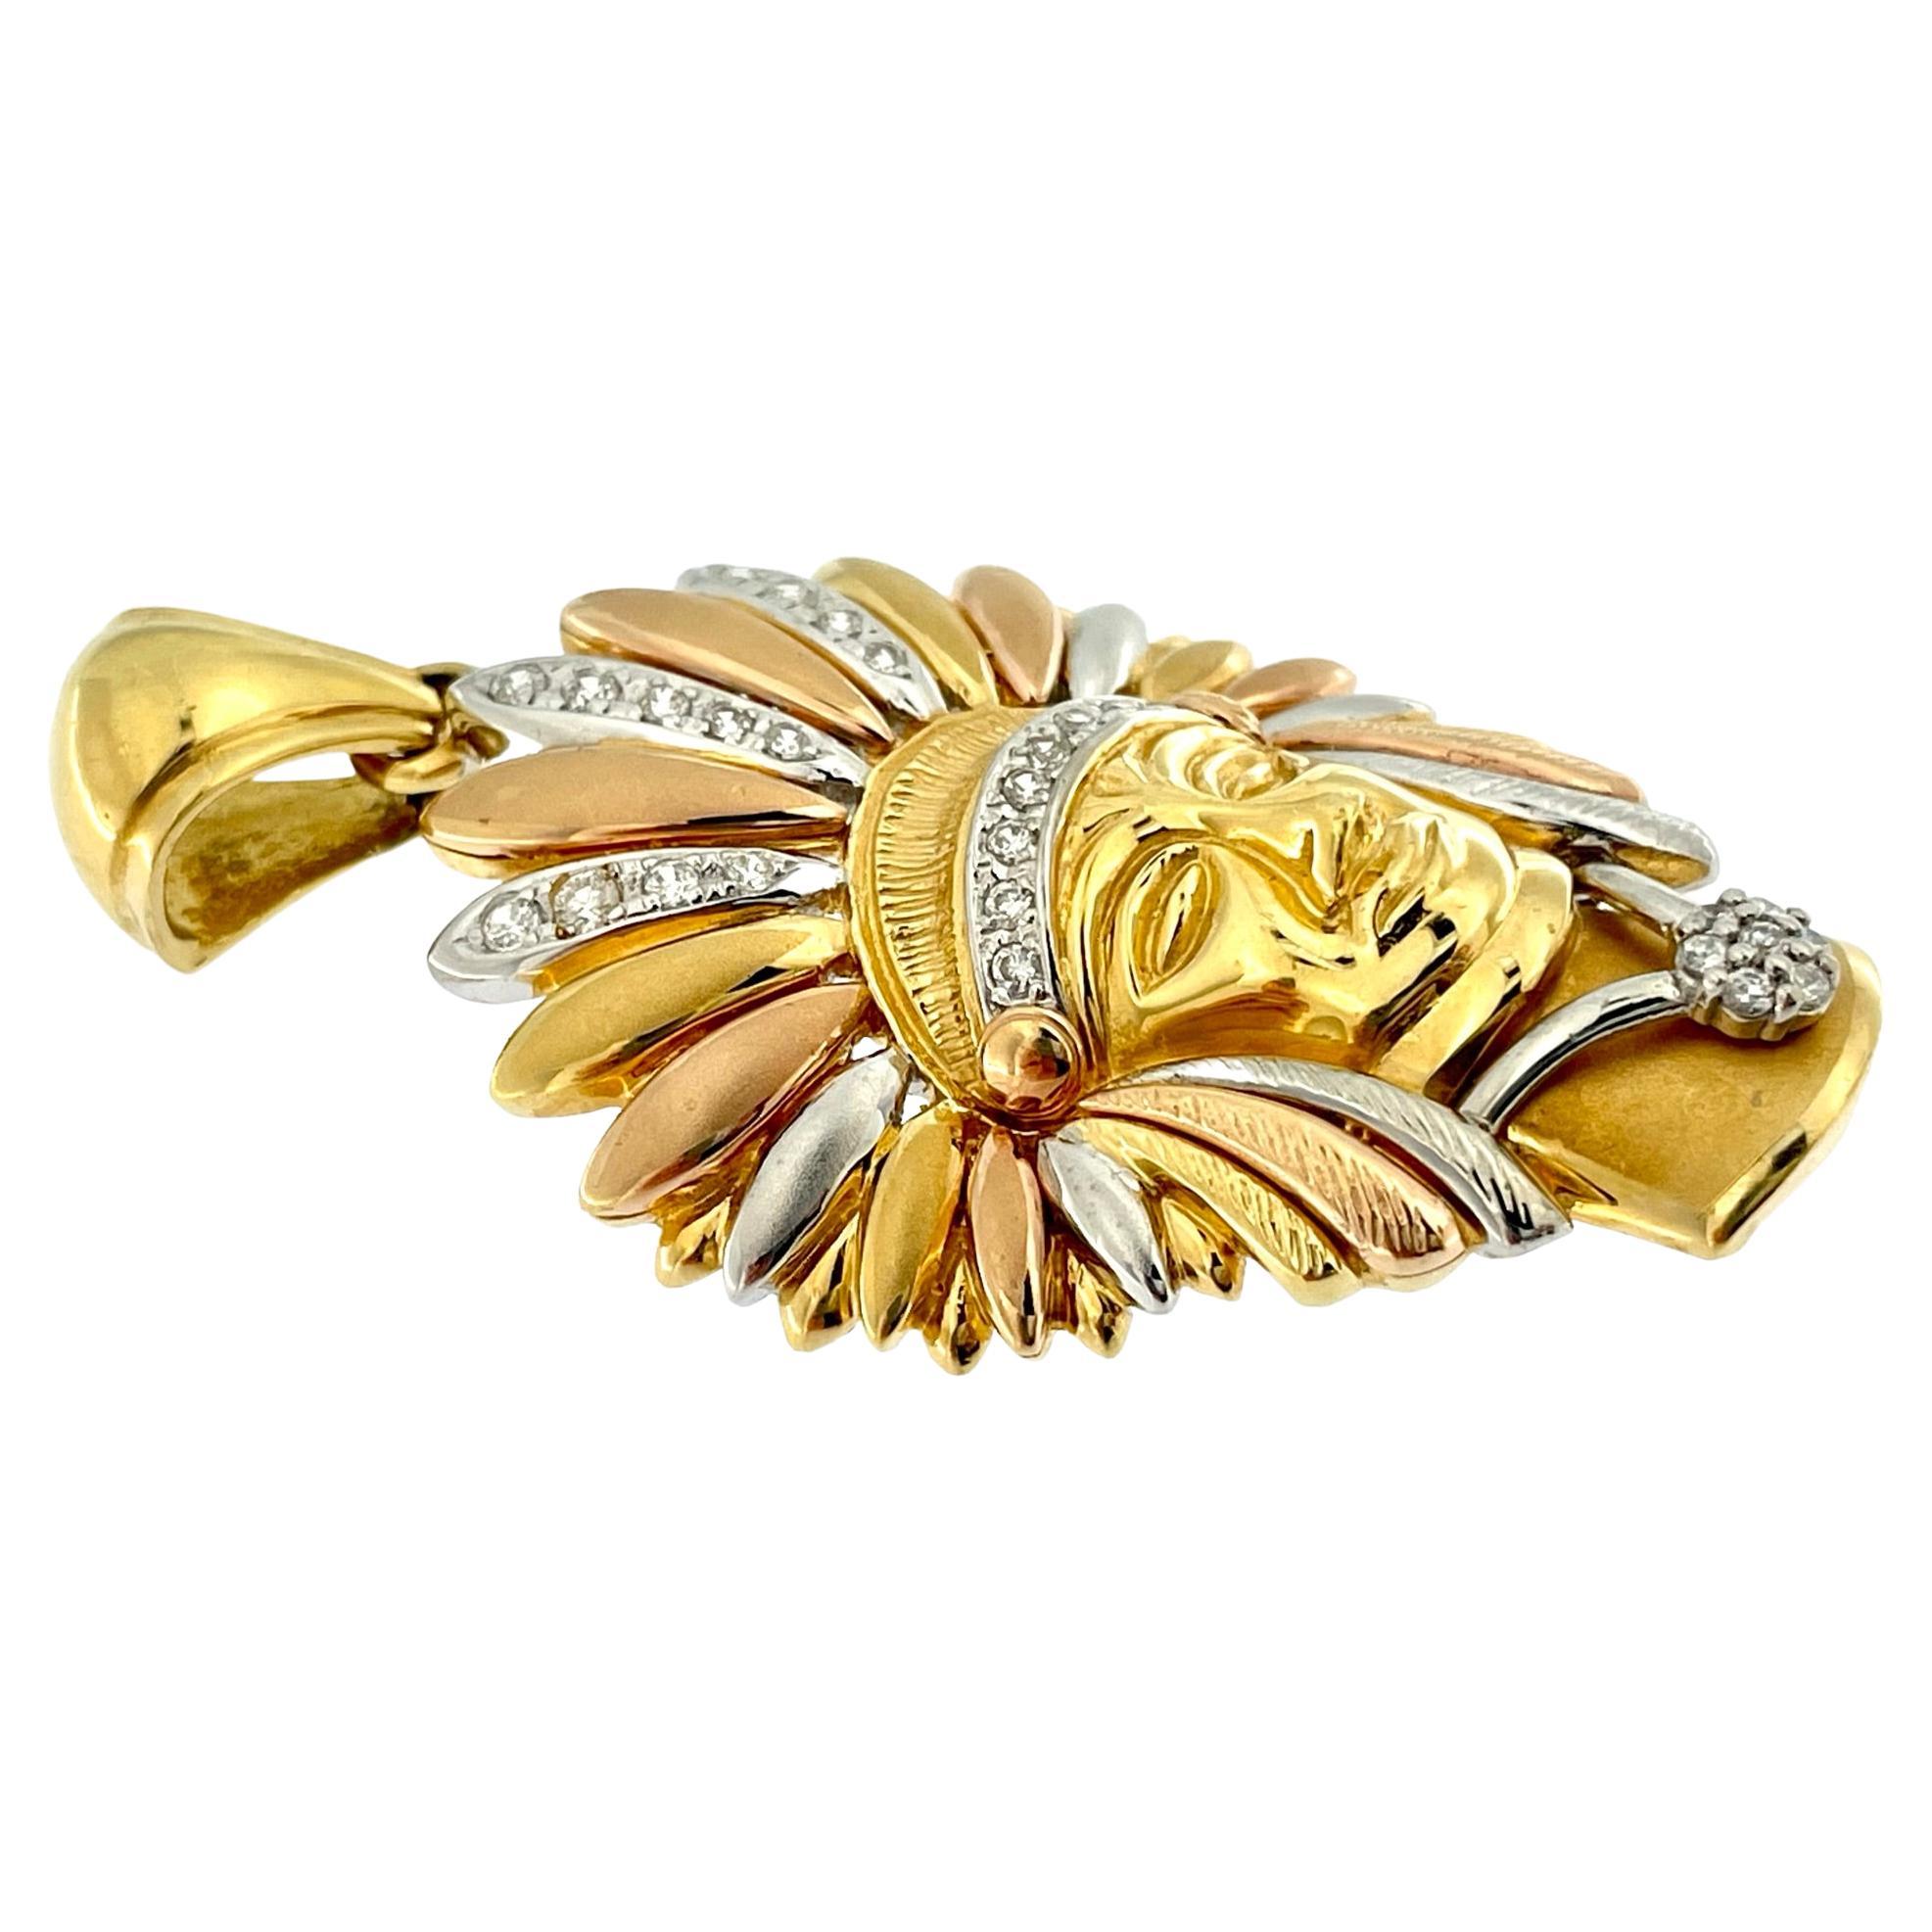 The Indian Chief Head 18kt Gold-Trio with Diamonds is a stunning and intricately designed piece of jewelry that pays homage to the rich cultural heritage of natives americans. It is crafted using three types of gold: 18kt yellow gold, 18kt white